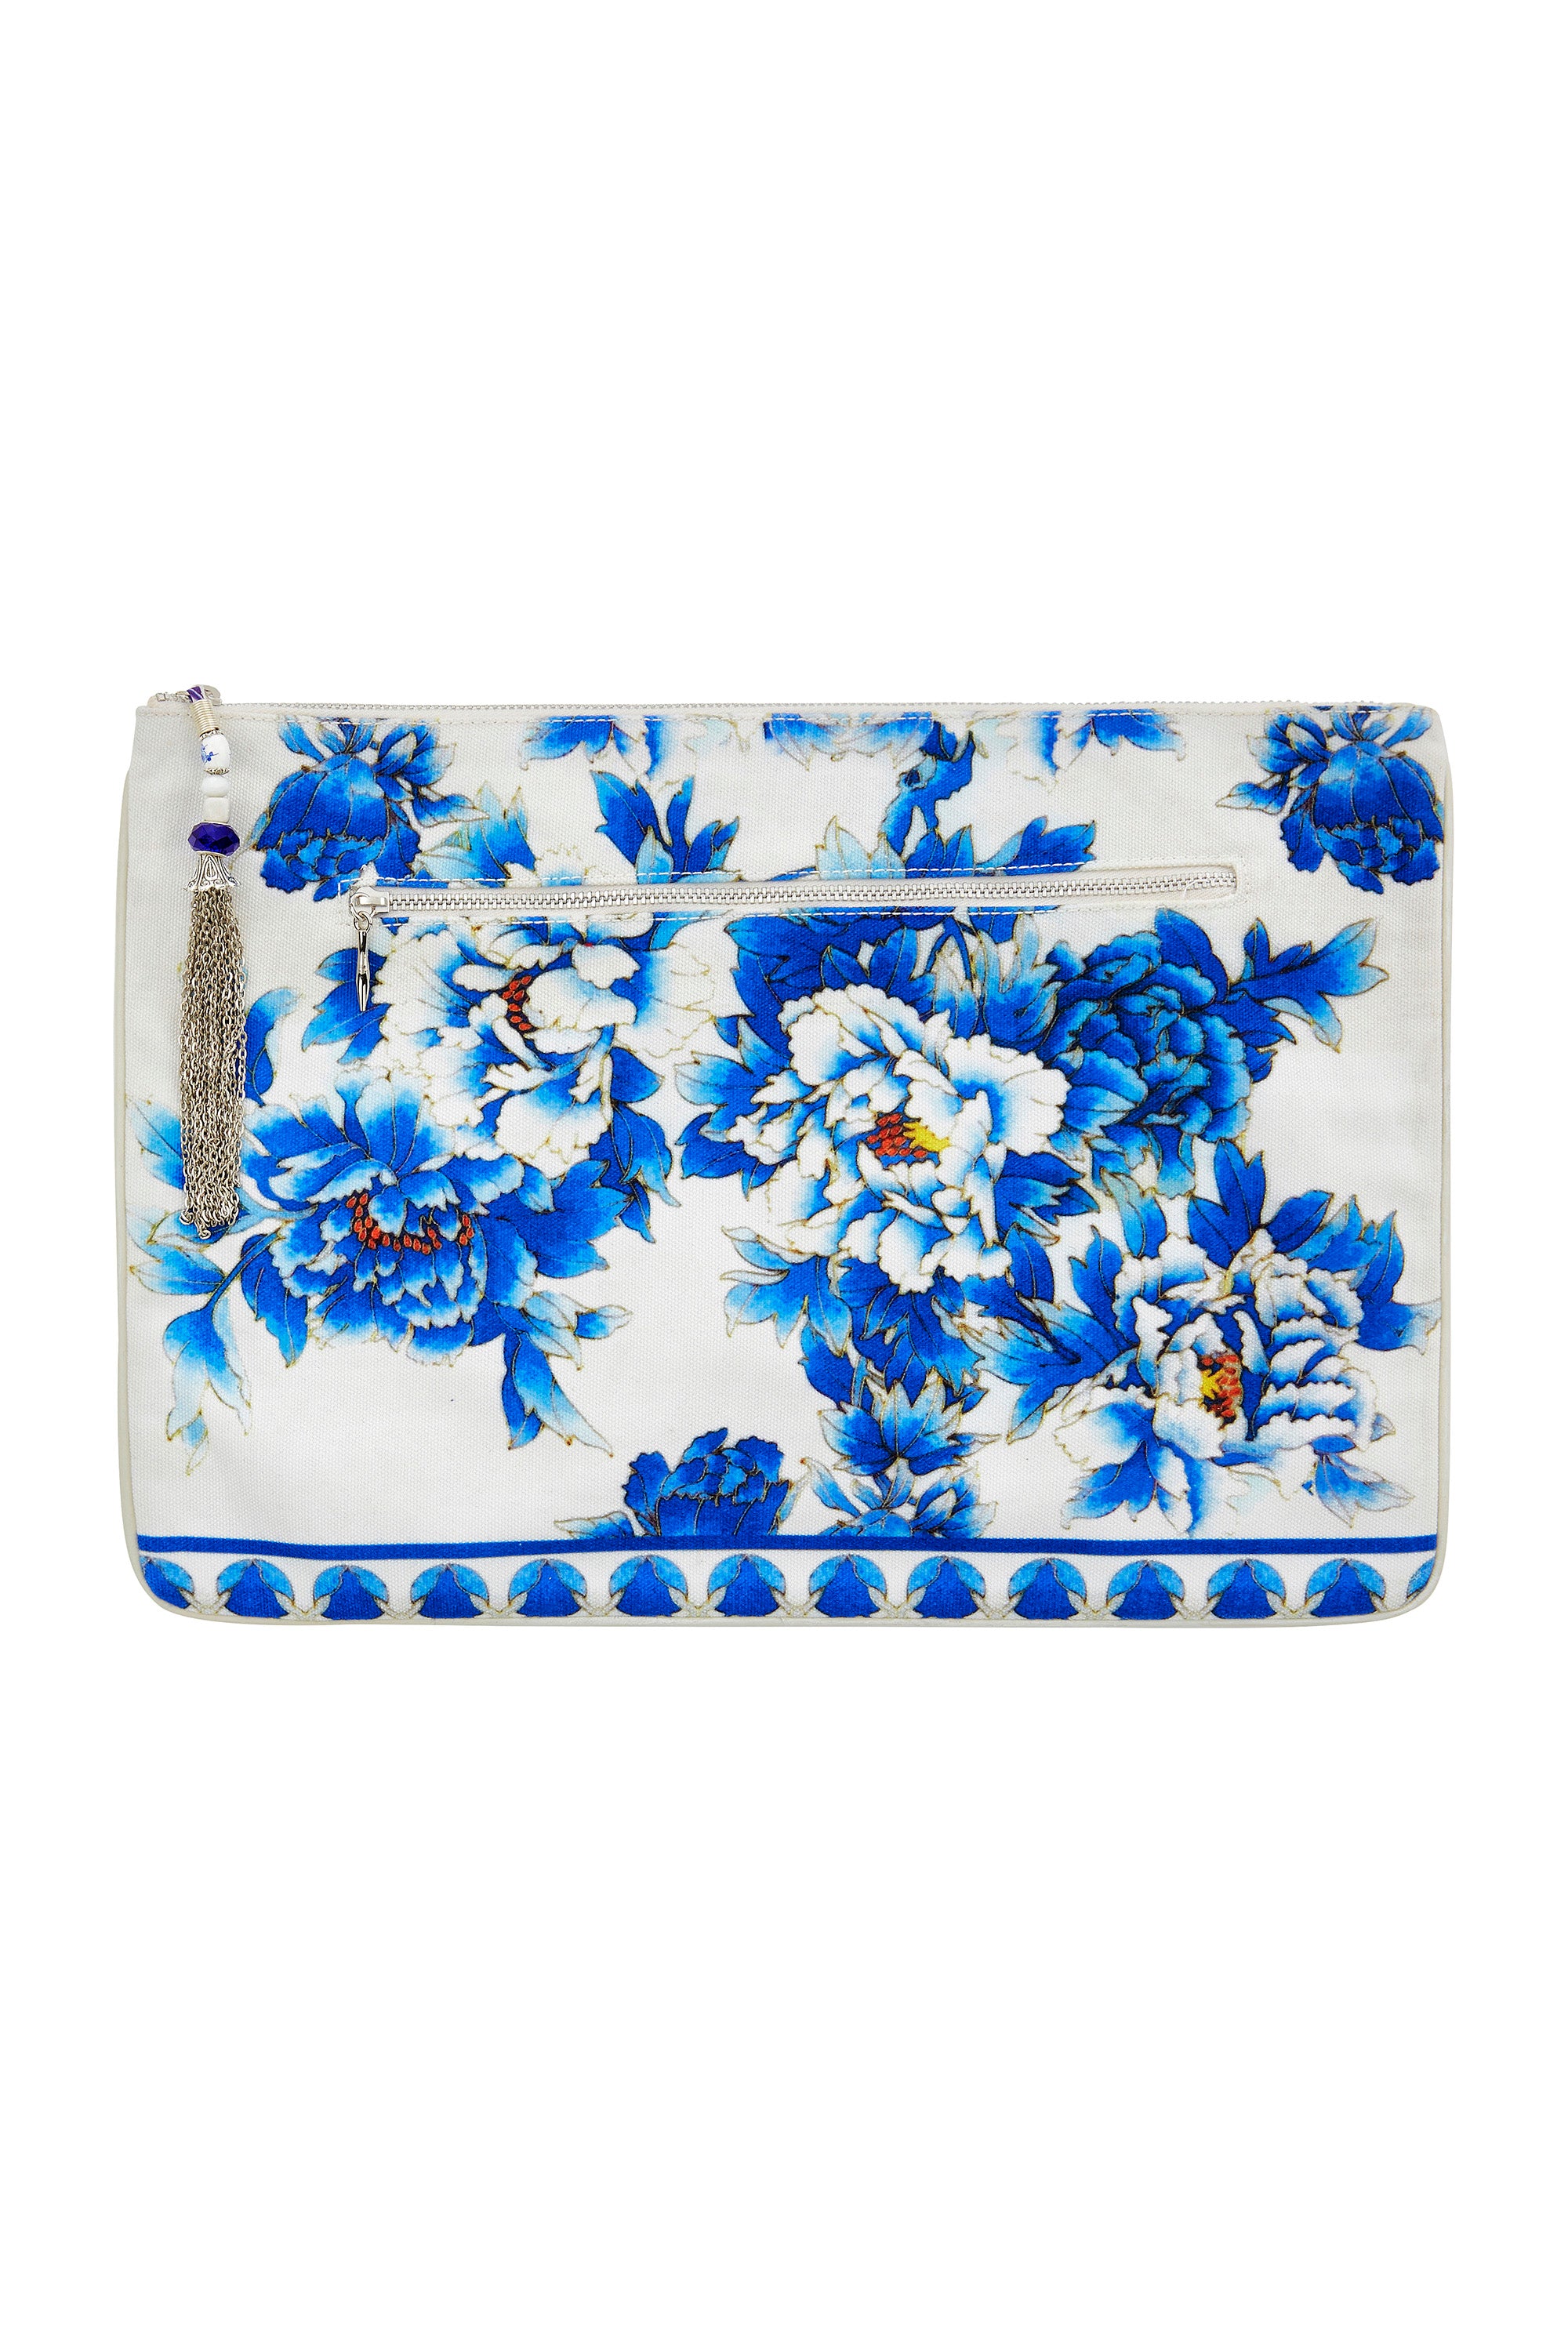 RING OF ROSES LARGE CANVAS CLUTCH